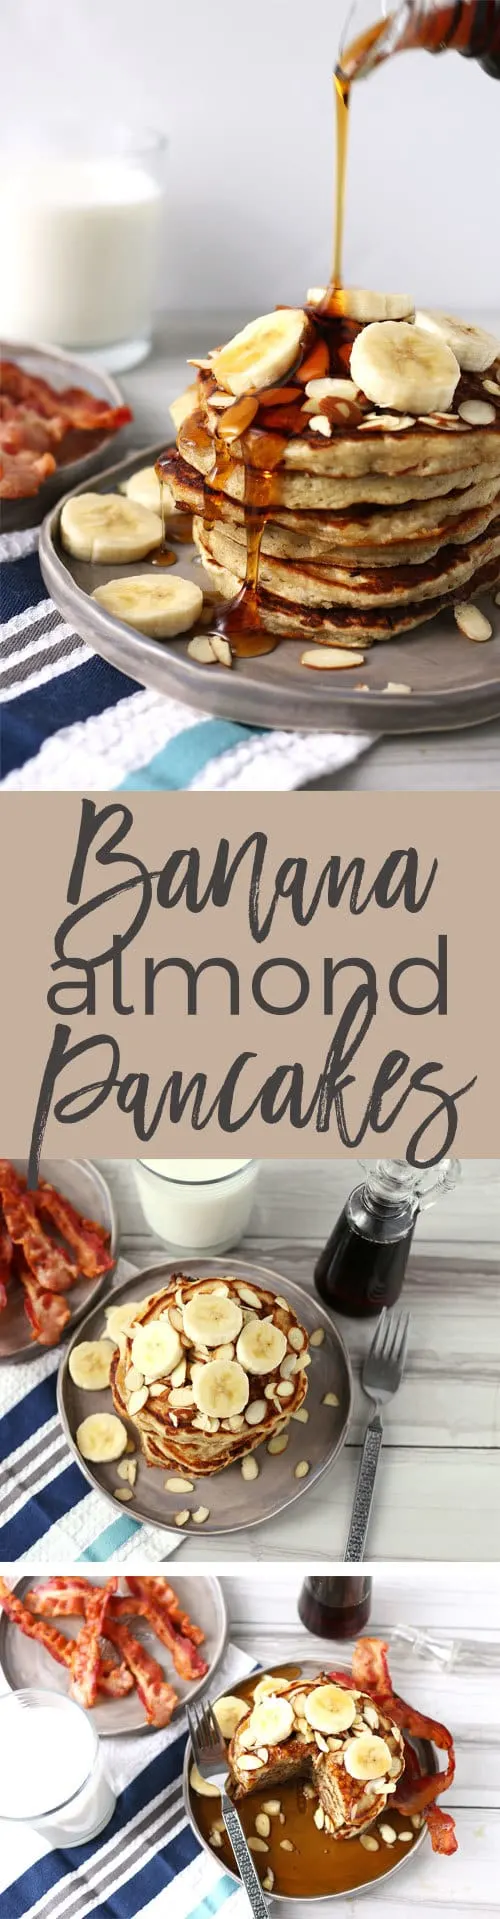 These banana almond pancakes are perfect for weekend breakfasts! Forget about banana bread - use your overripe bananas to make this easy pancake recipe. | honeyandbirch.com